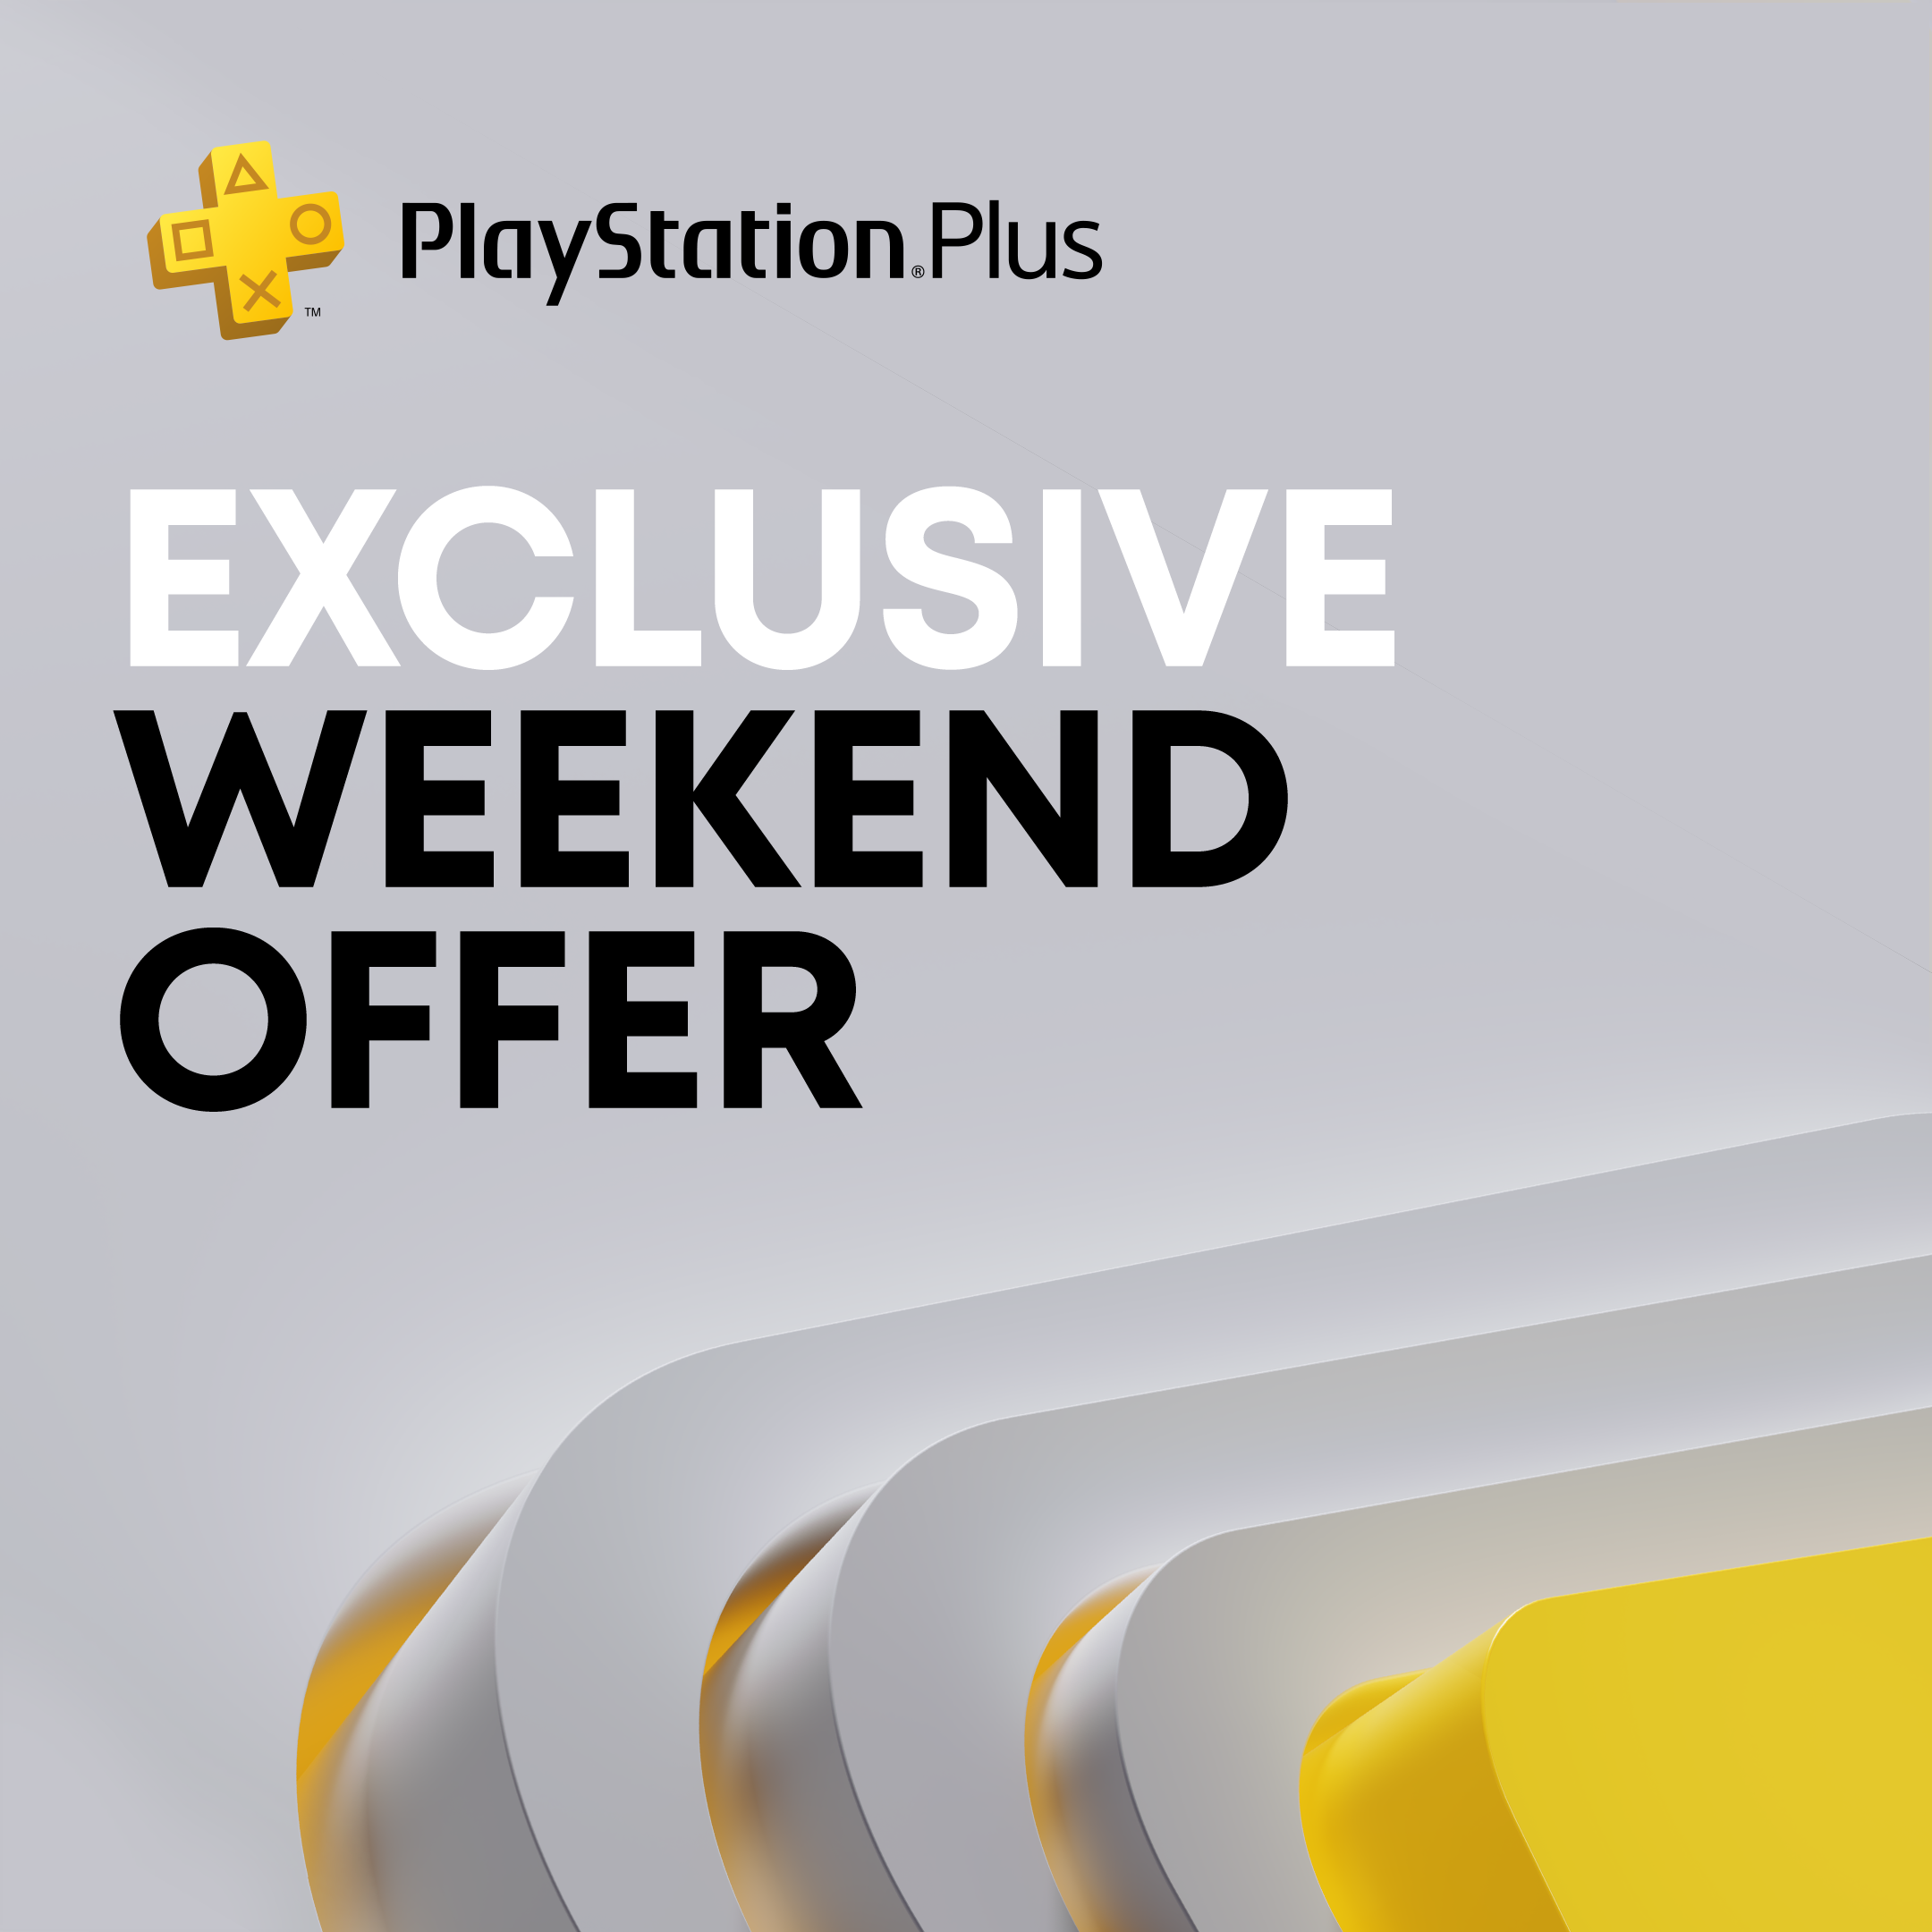 Games and Bundles Discounts in PlayStation Store — PS Deals USA